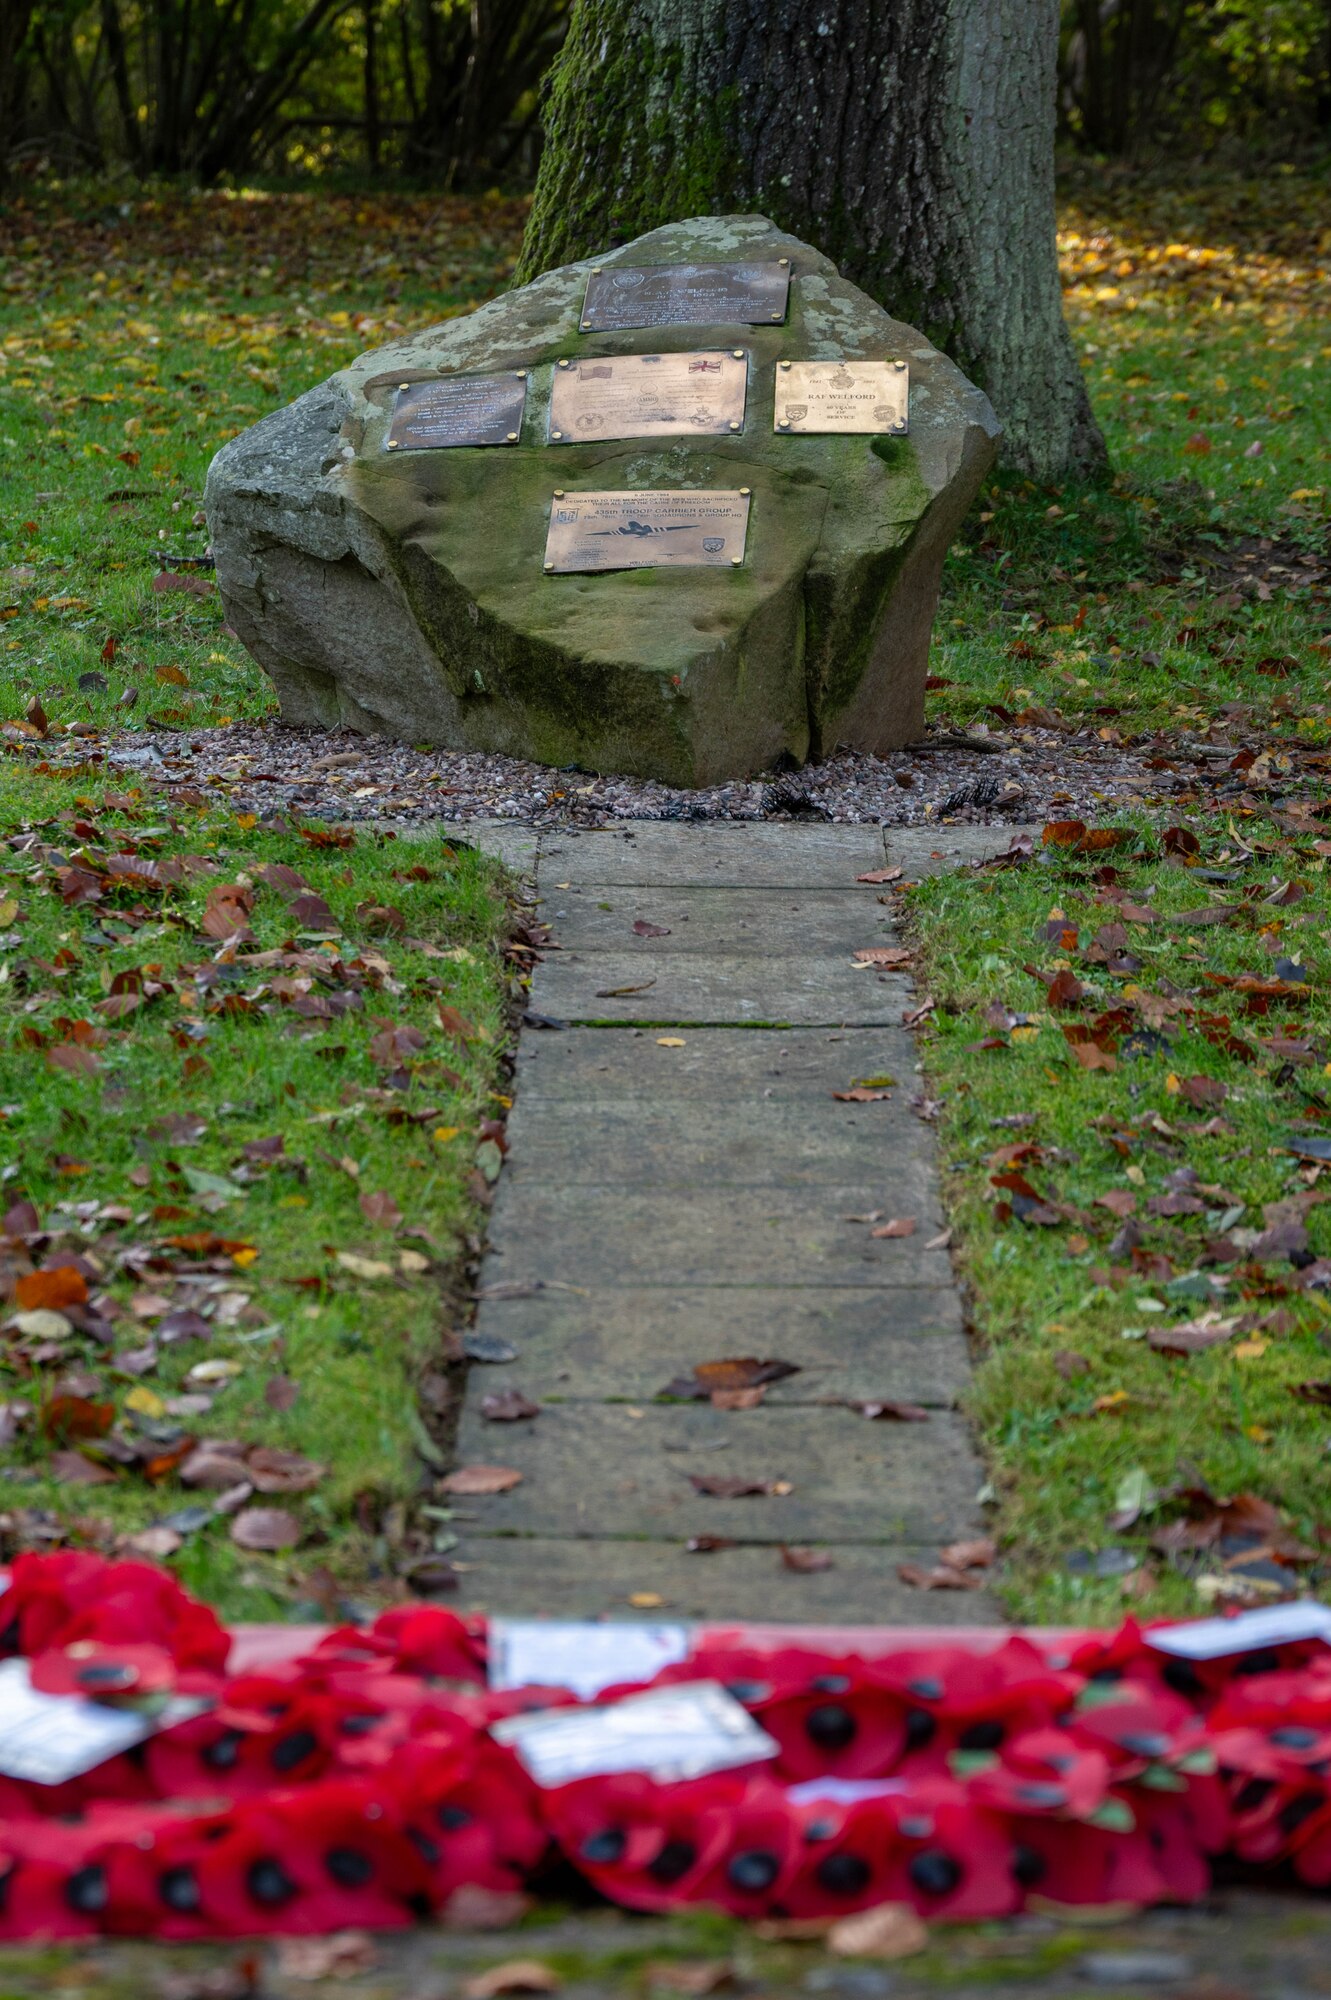 Poppy wreaths lay at the base of a memorial.